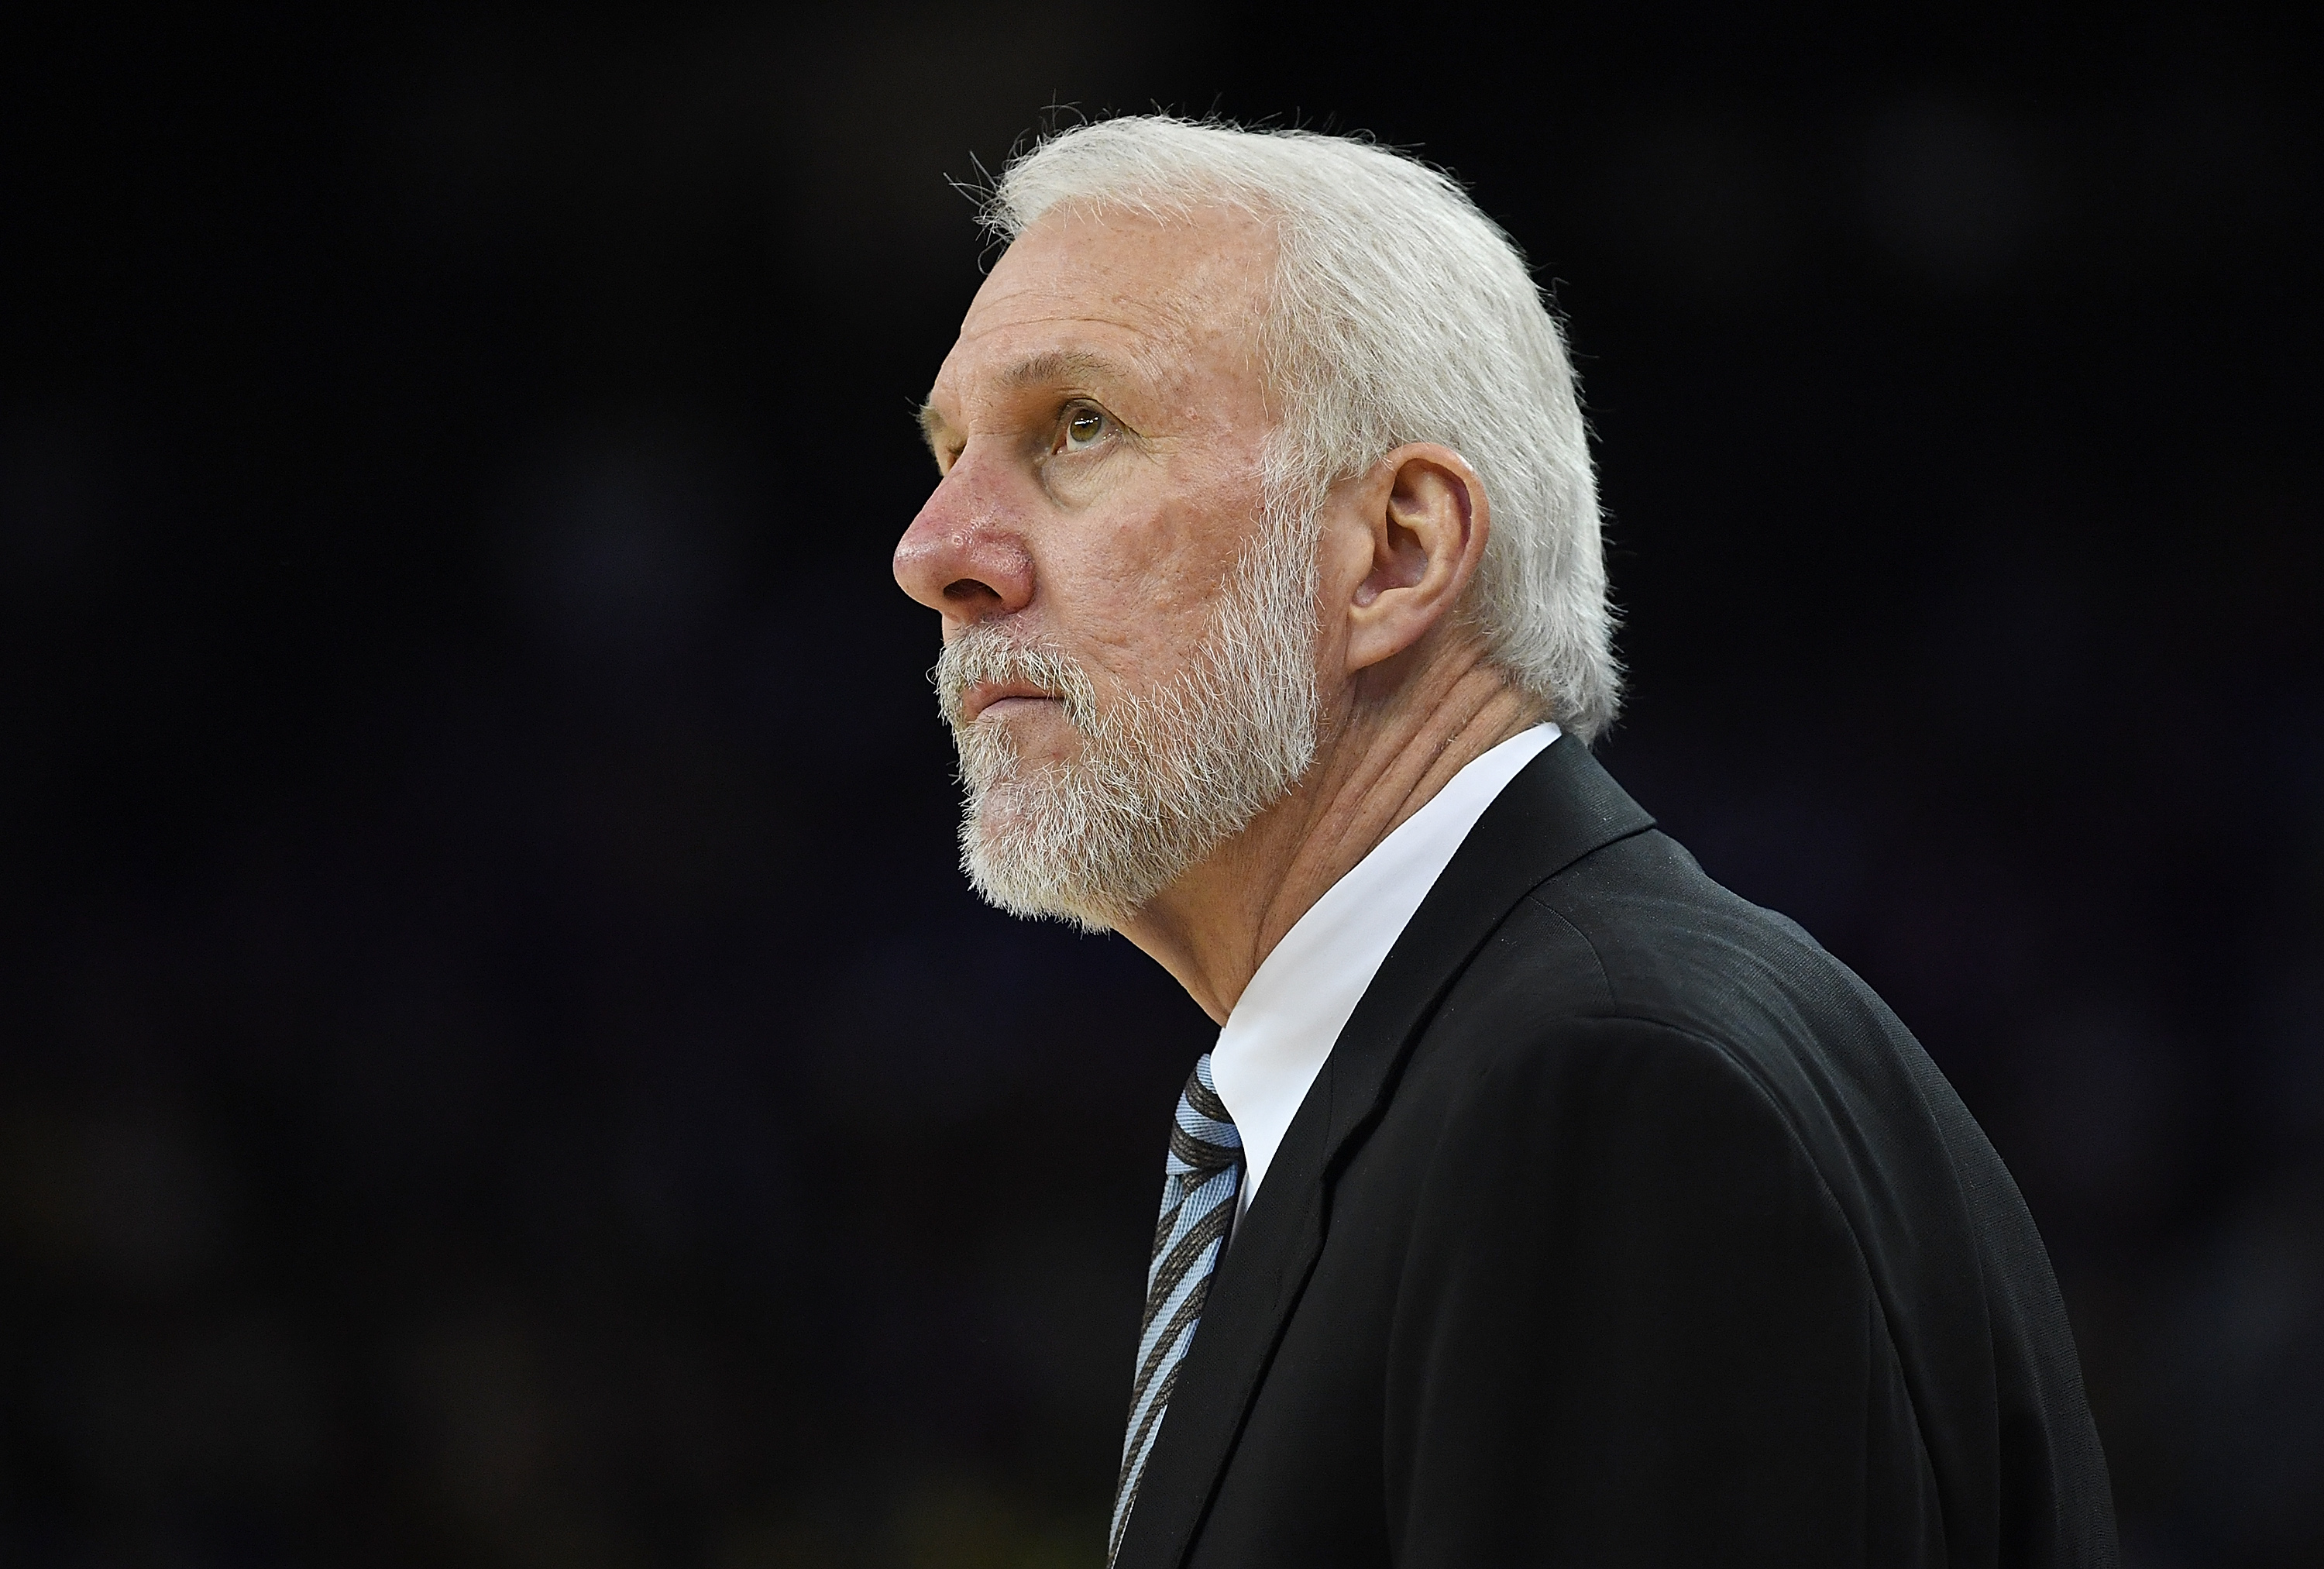 OAKLAND, CALIFORNIA - APRIL 07: Head coach Gregg Popovich of the San Antonio Spurs looks on against the Golden State Warriors in the fourth quarter of an NBA basketball game at ORACLE Arena on April 7, 2016 in Oakland, California. NOTE TO USER: User expressly acknowledges and agrees that, by downloading and or using this photograph, User is consenting to the terms and conditions of the Getty Images License Agreement.   Thearon W. Henderson/Getty Images/AFP